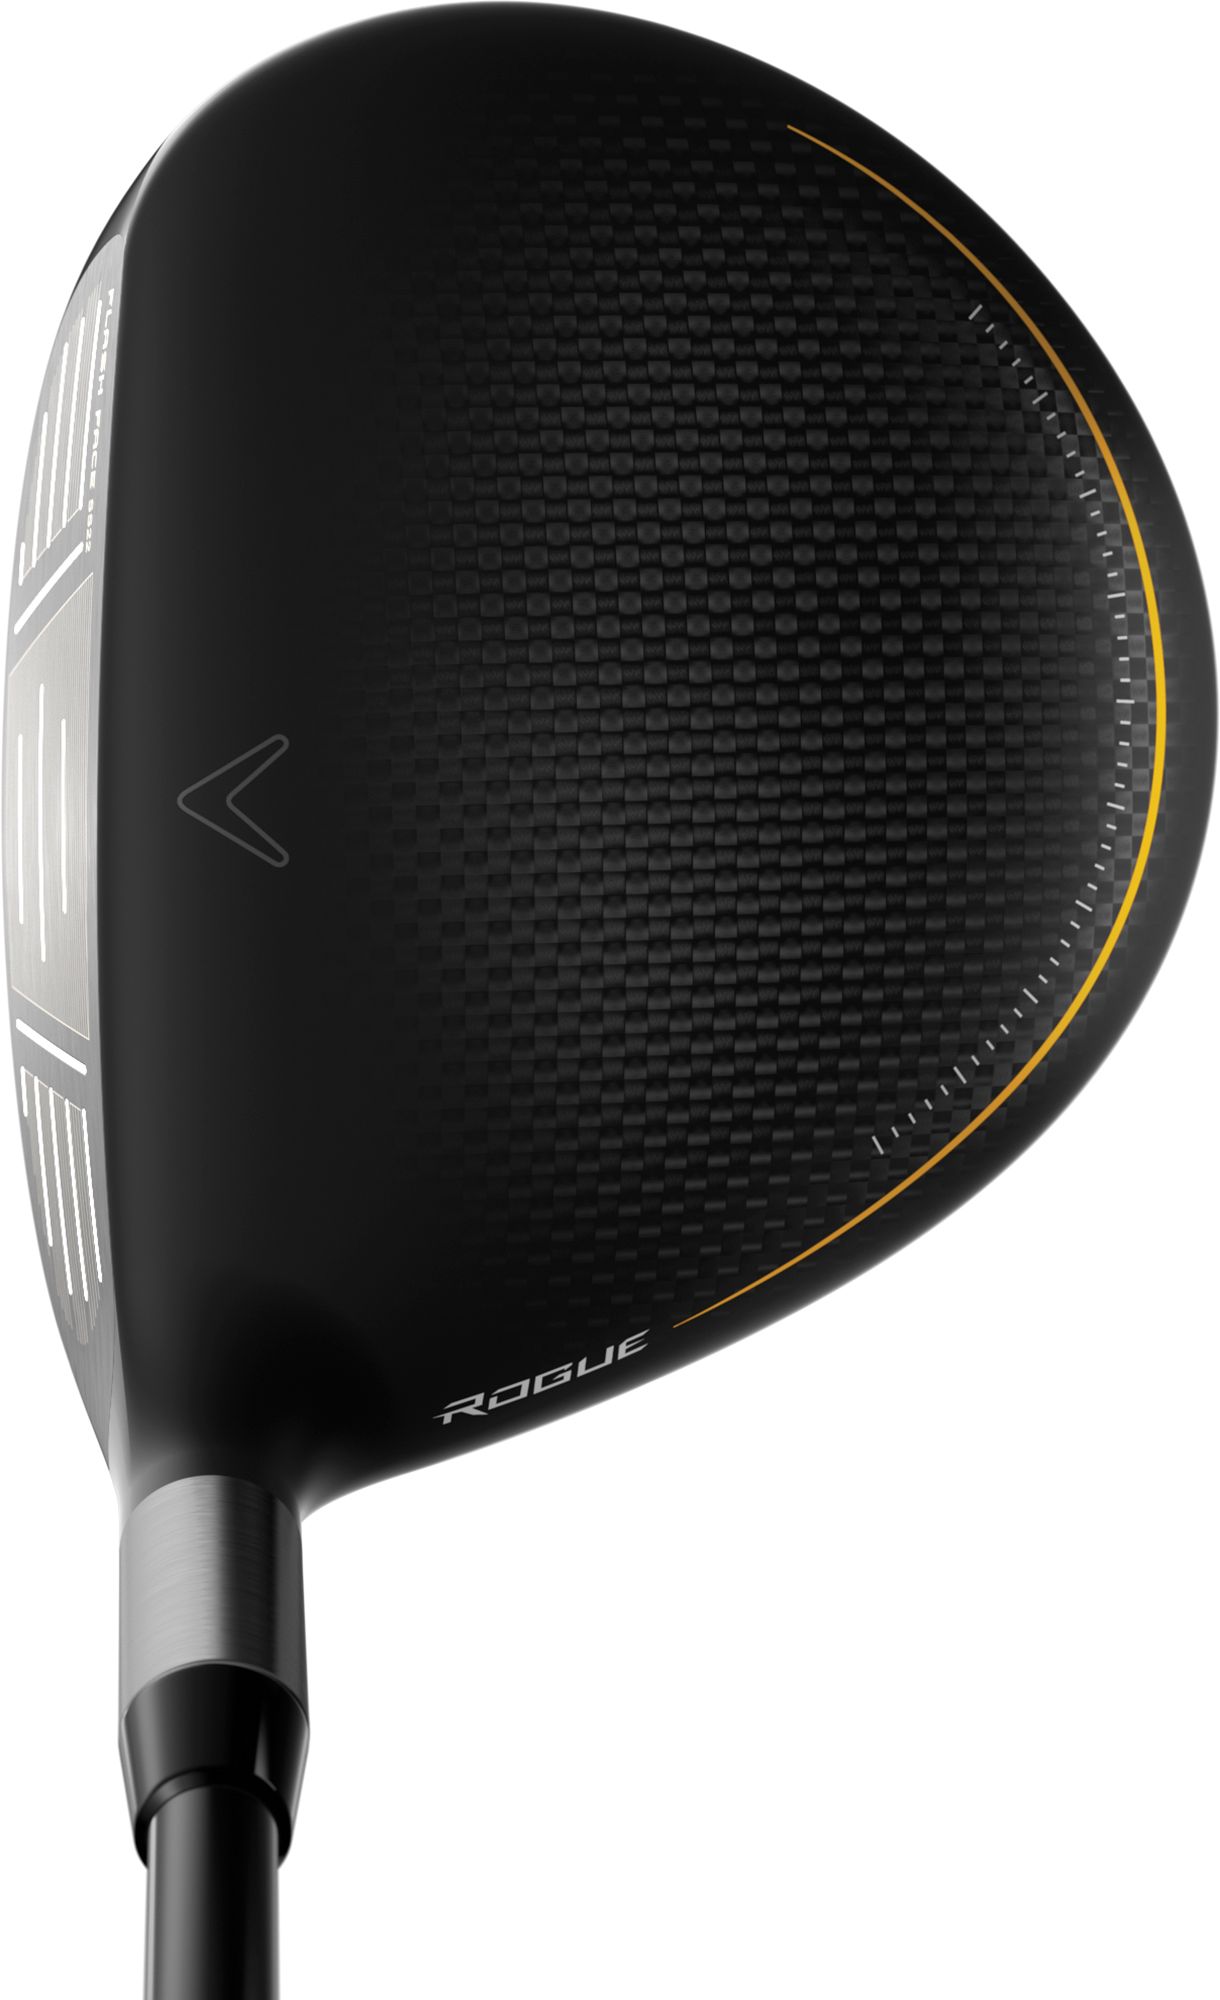 Callaway Rogue ST MAX Fairway Wood - Up to $100 Off | Dick's Sporting Goods